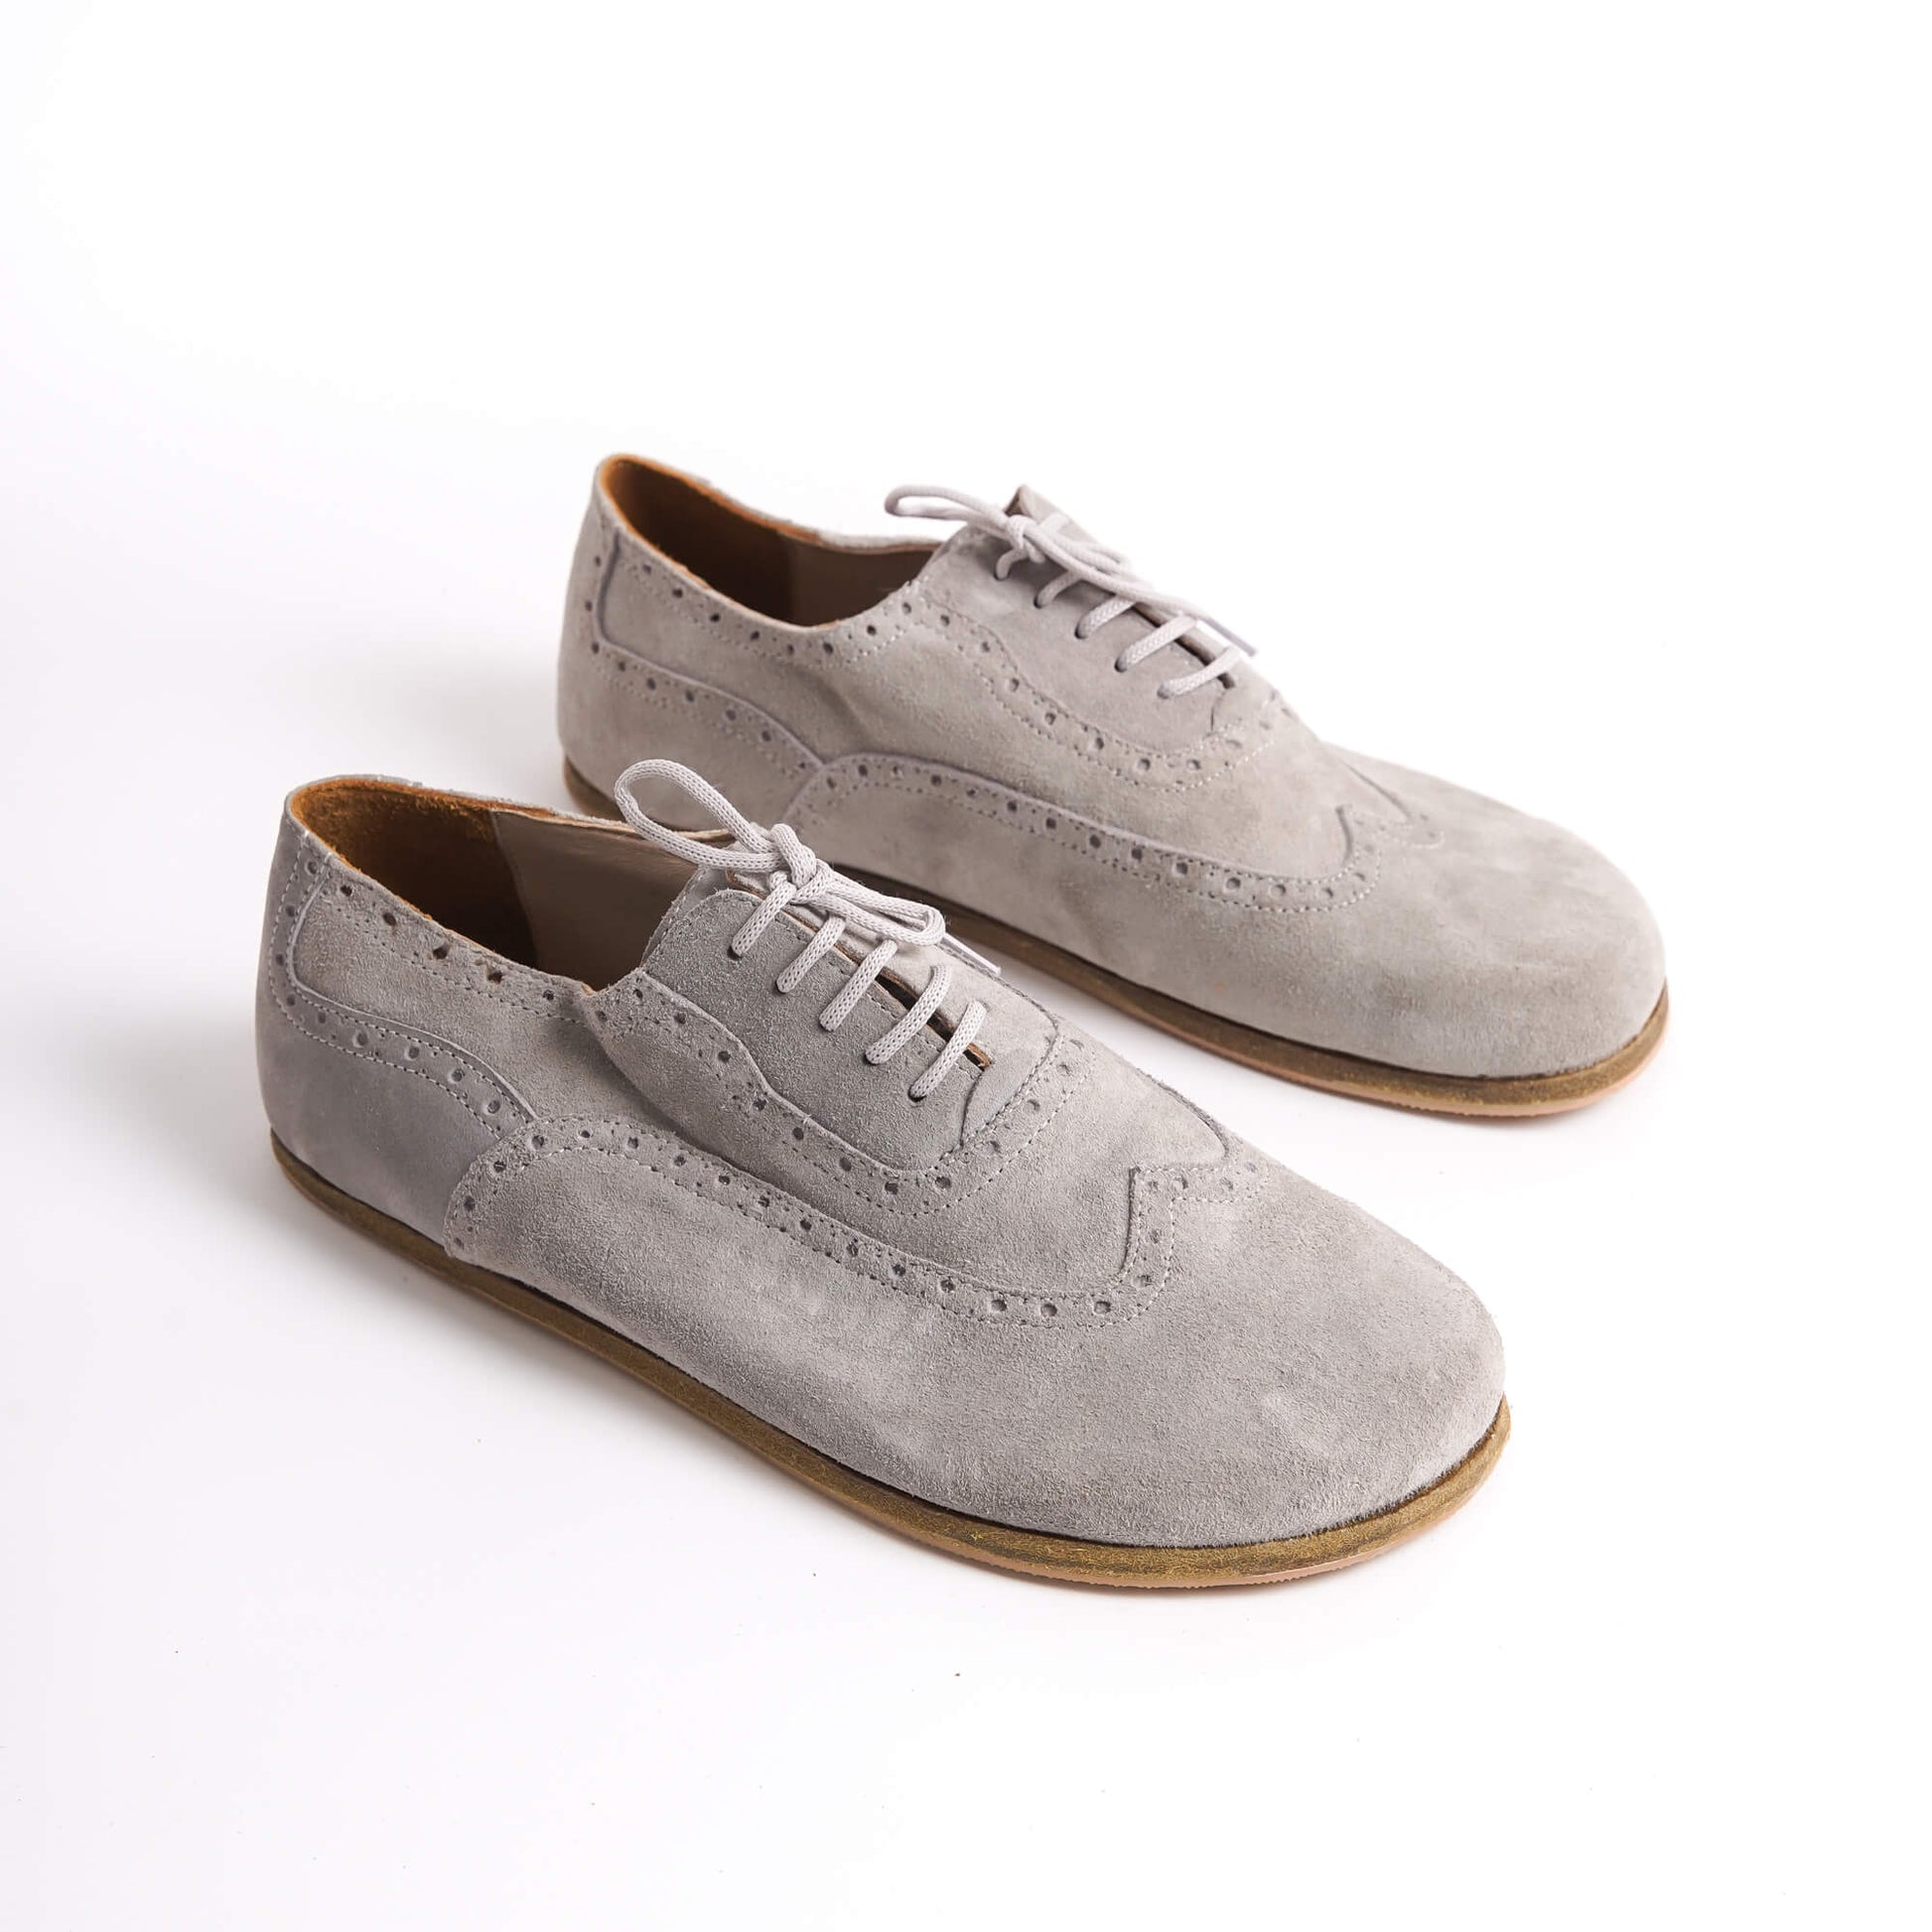 Elegant gray suede barefoot Oxfords with brogue details for men – stylish and comfortable.